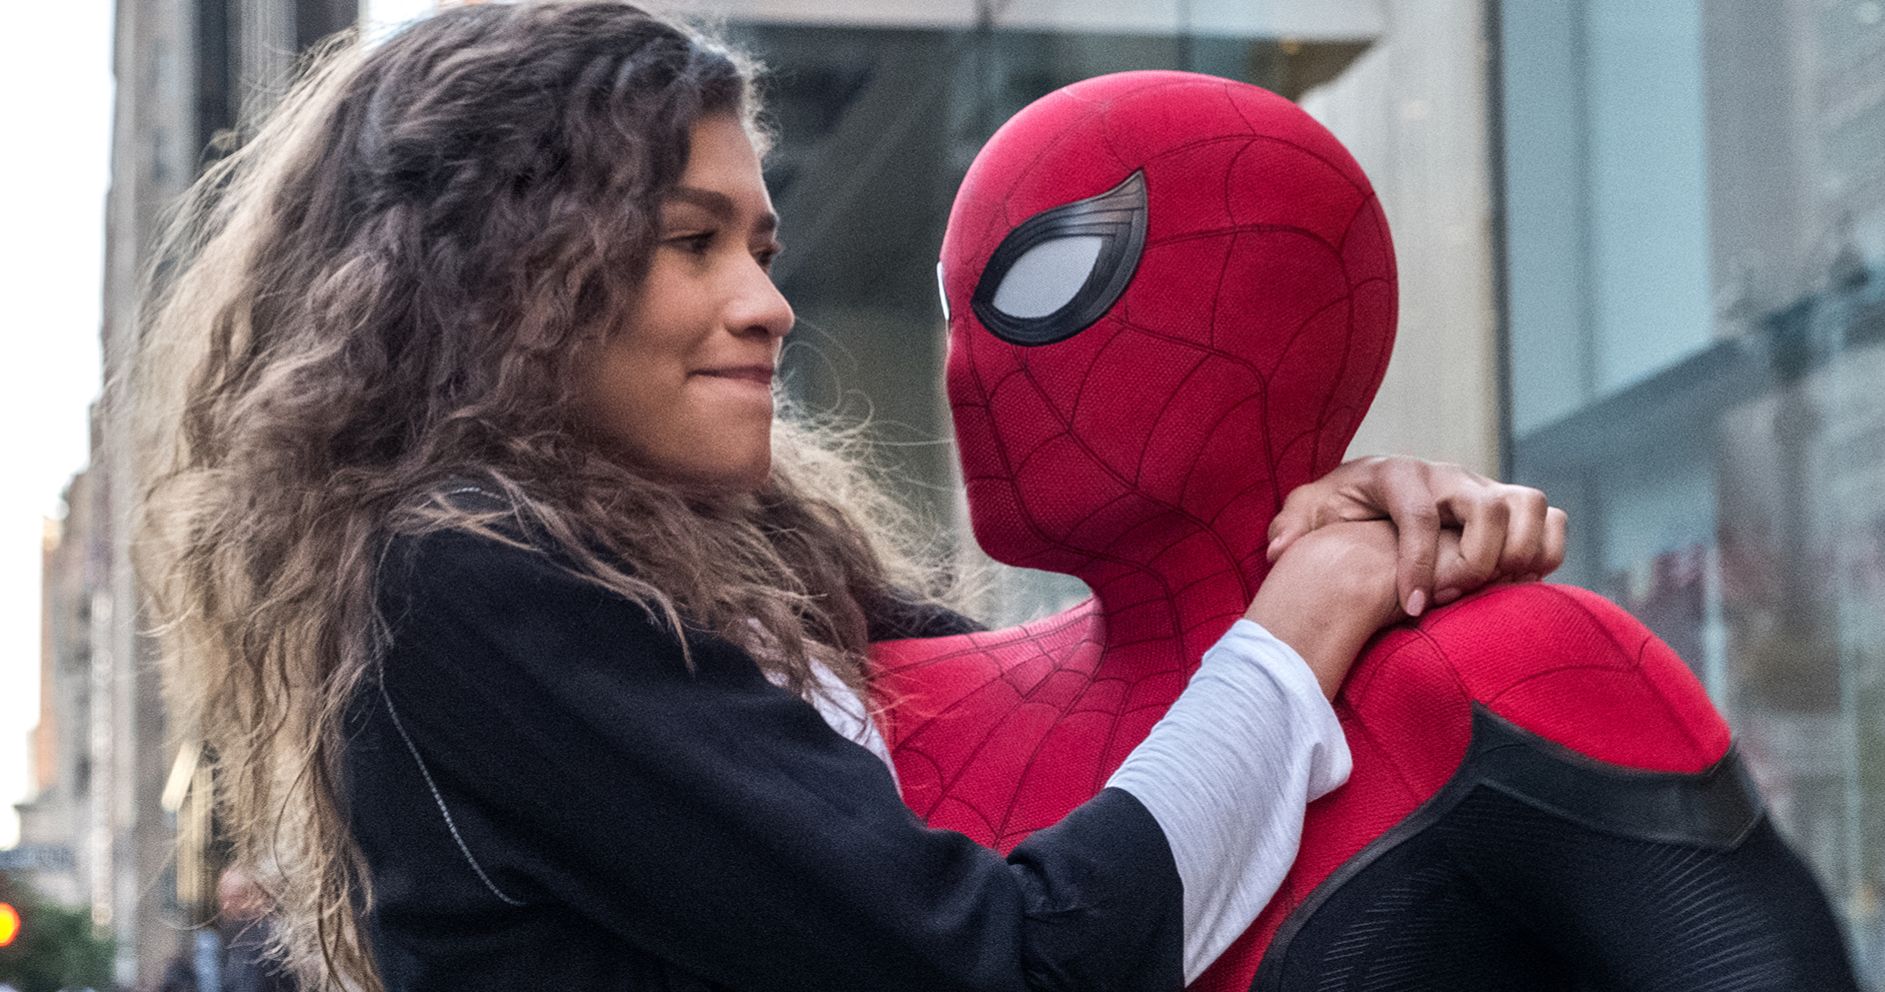 Zendaya Goes Full Mary Jane While Promoting Spider: Man: Far from Home